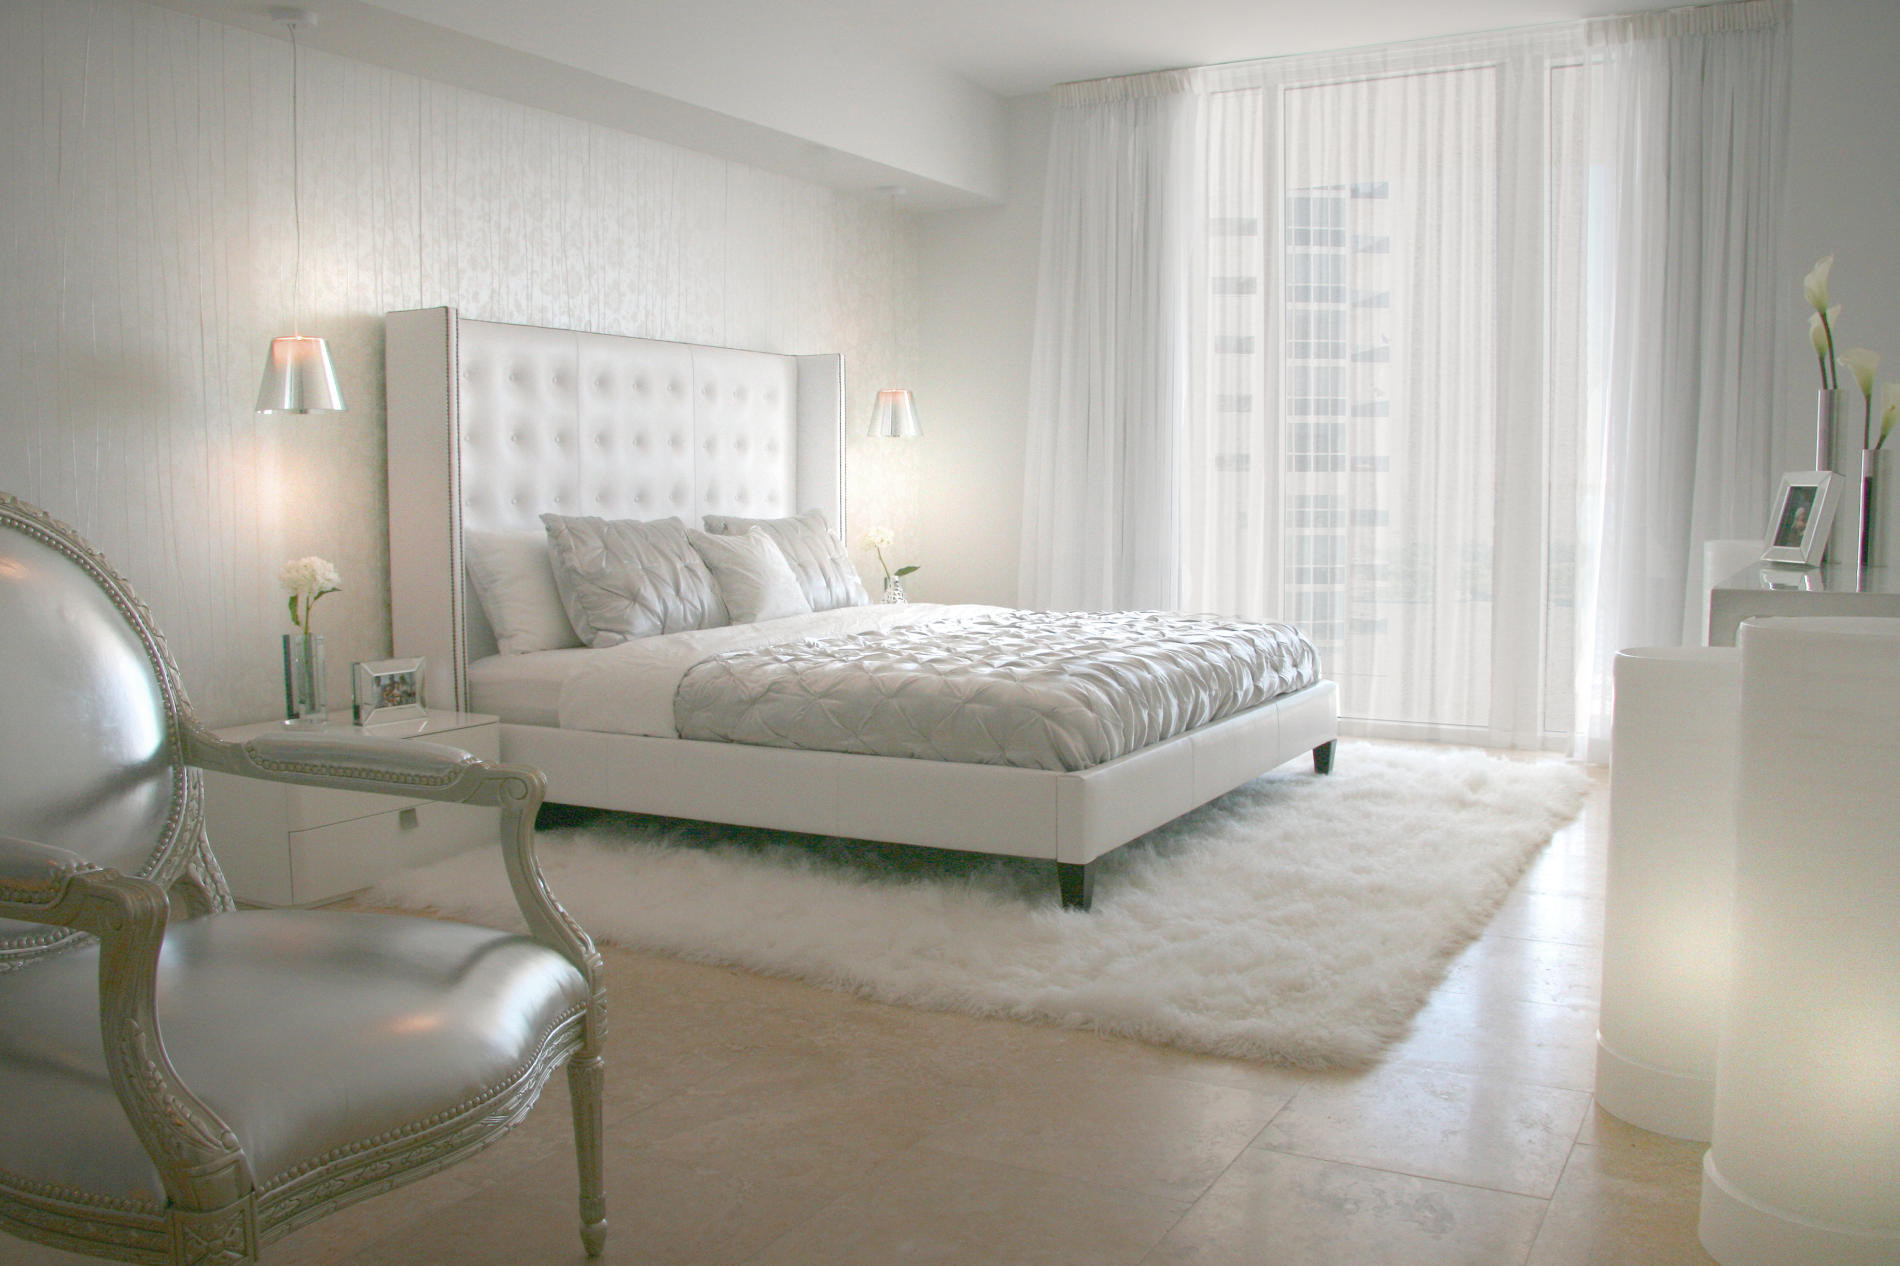 White Bedroom Decorating Ideas
 Your Bedroom Air Conditioning Can Make or Break Your Decor